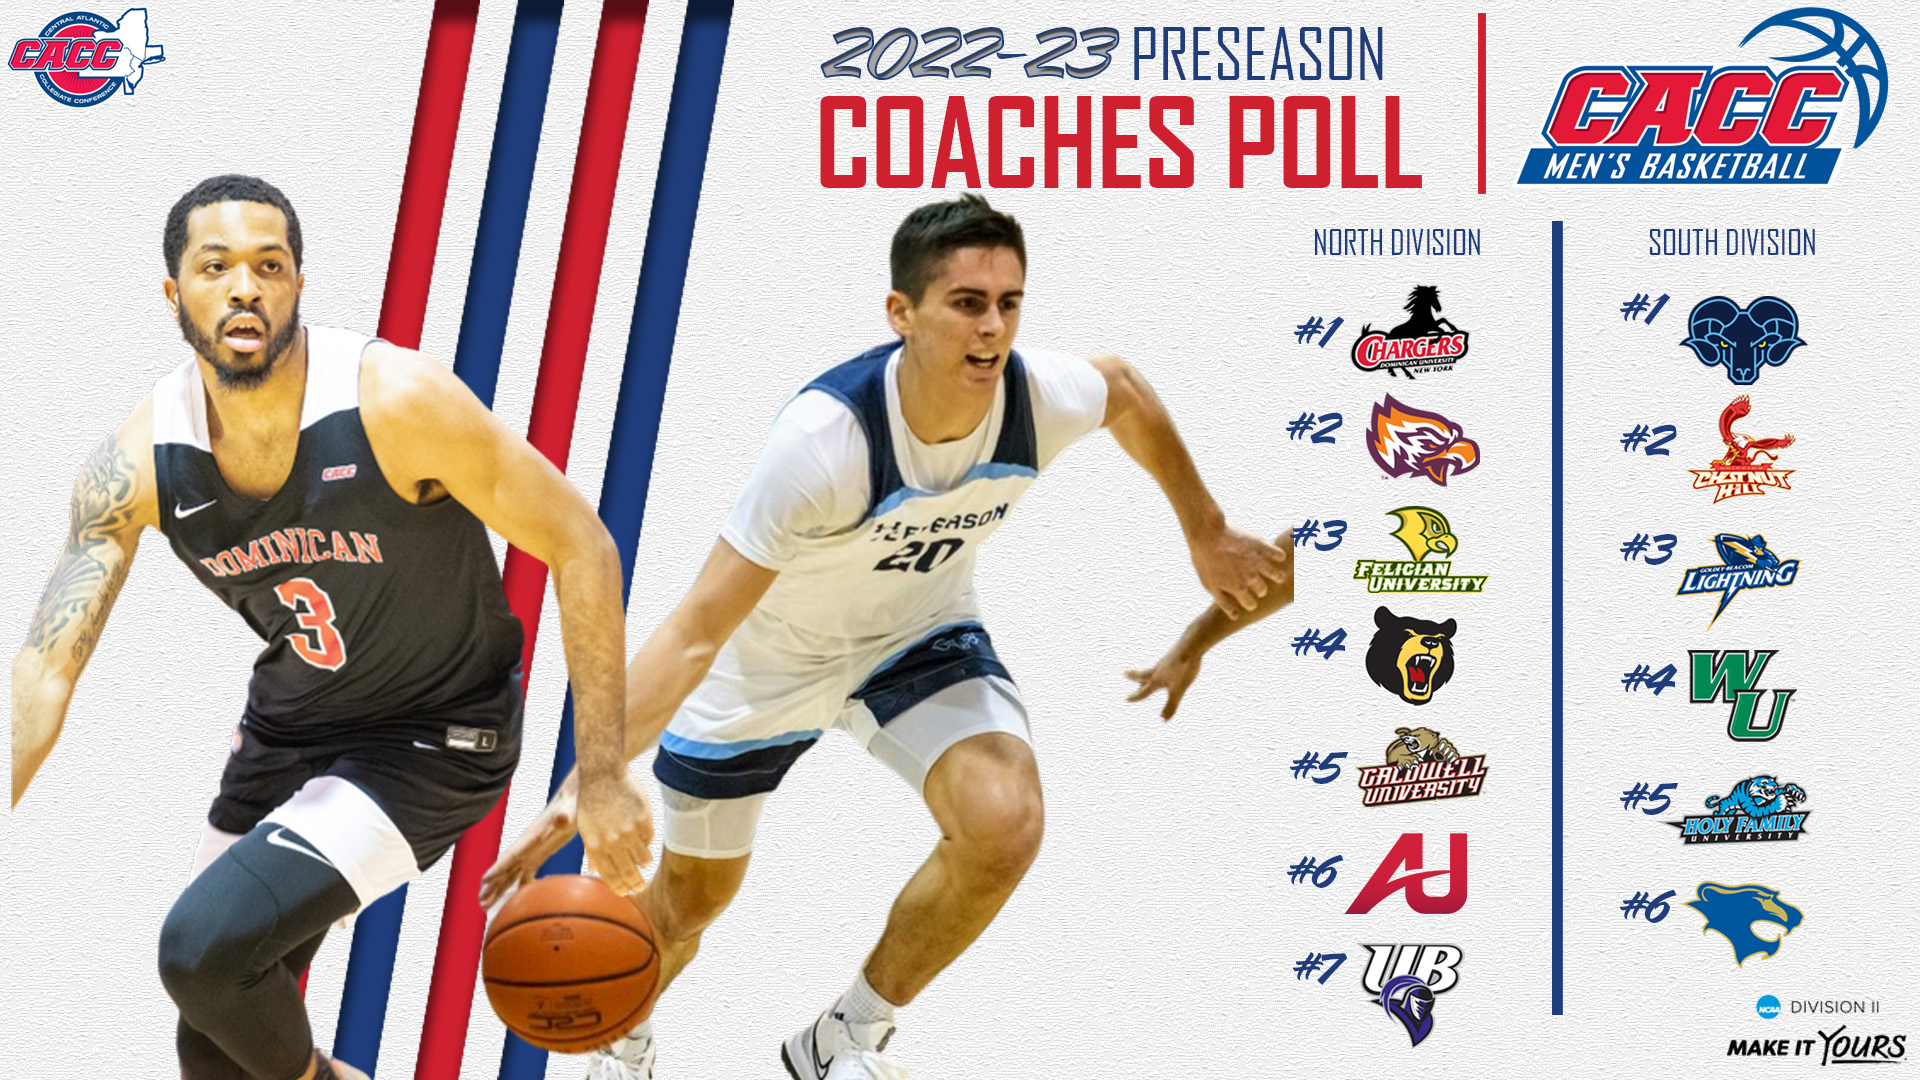 CHARGERS CLAIM TOP SPOT IN 2022-23 CACC MEN'S BASKETBALL PRESEASON POLL